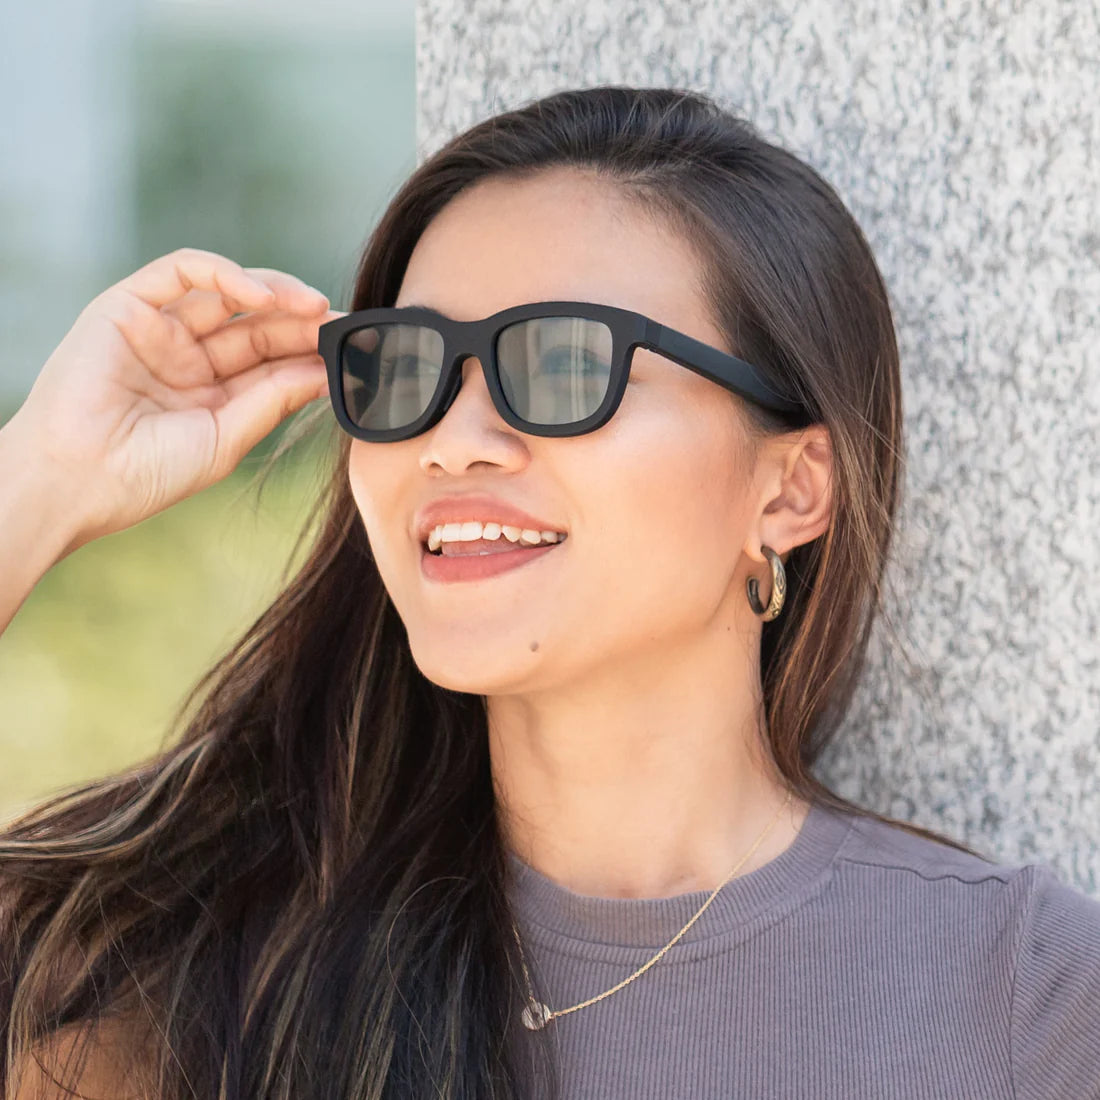 Ampere Dusk - App-enabled tint changing smart sunglasses with built-in audio